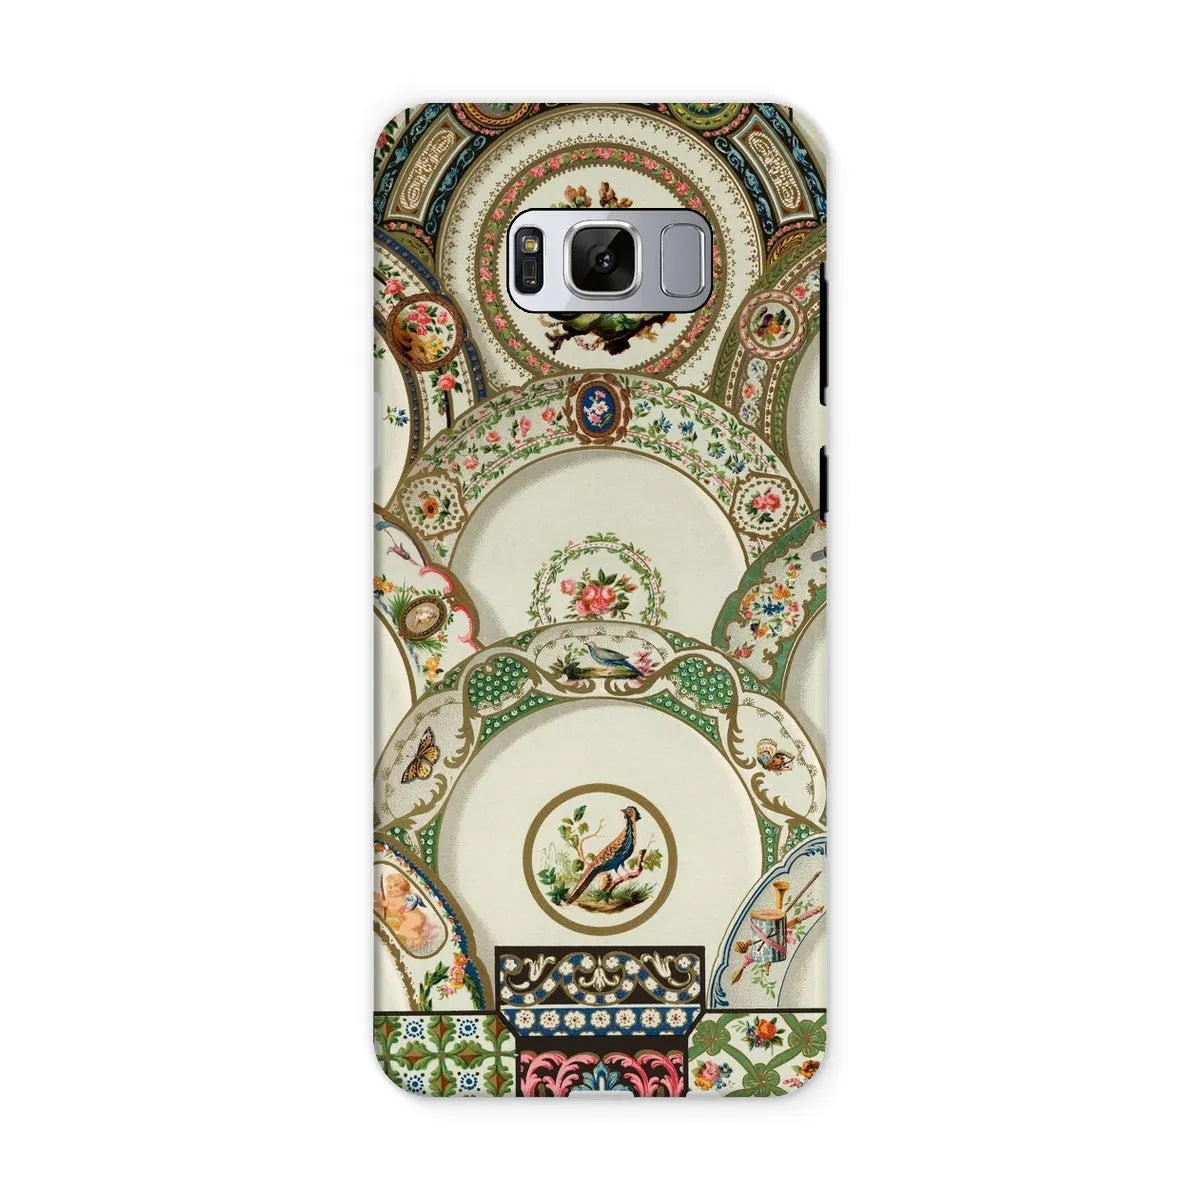 Decorative Plates By Auguste Racinet Tough Phone Case - Samsung Galaxy S8 / Matte - Mobile Phone Cases - Aesthetic Art